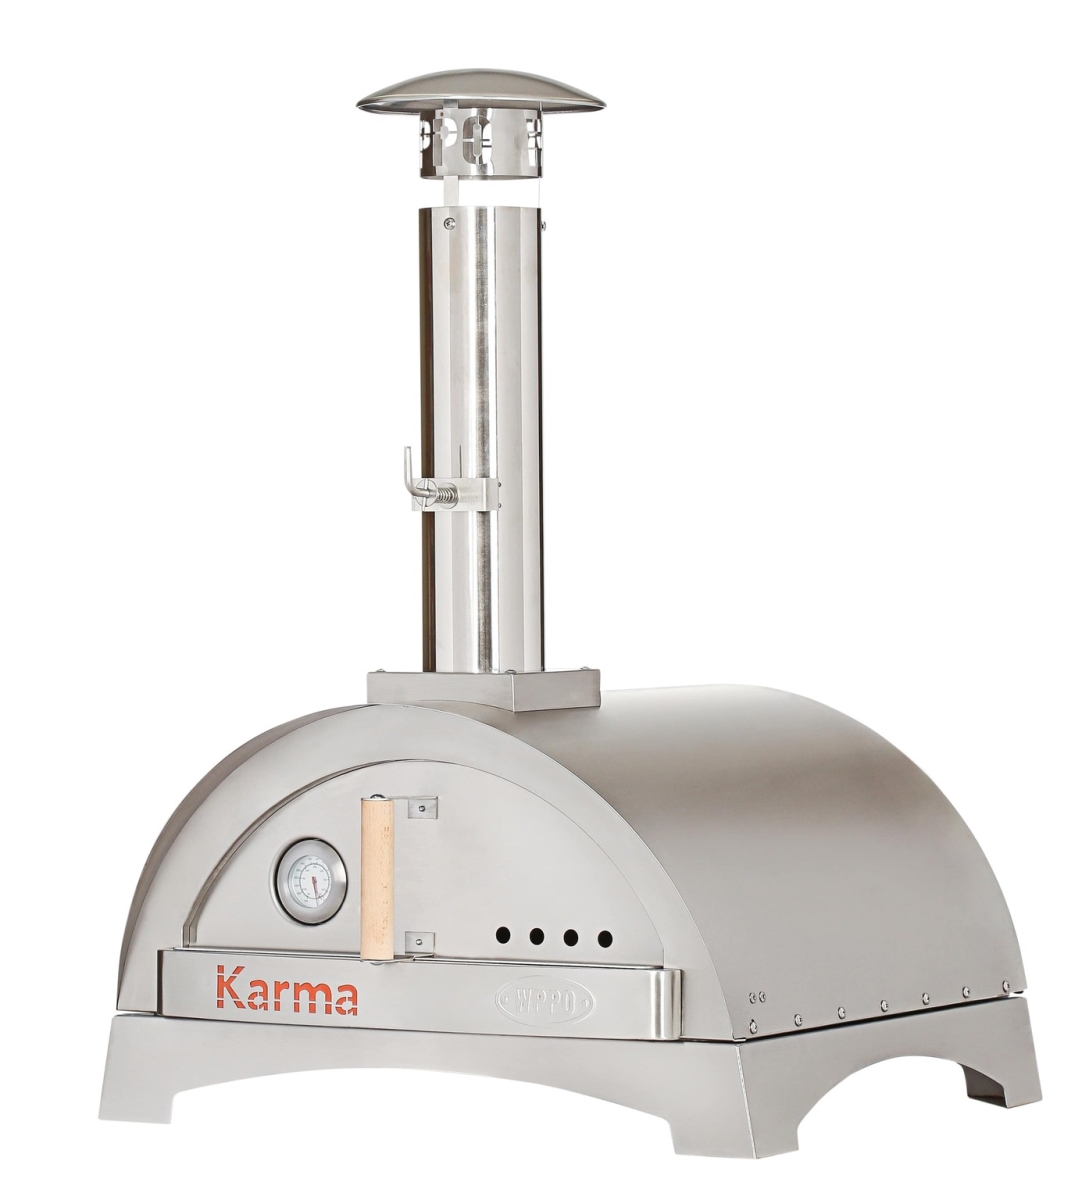 WPPO WKK-01S-304 25 in. Karma 304 Stainless Steel Wood Fired Pizza Oven with Base